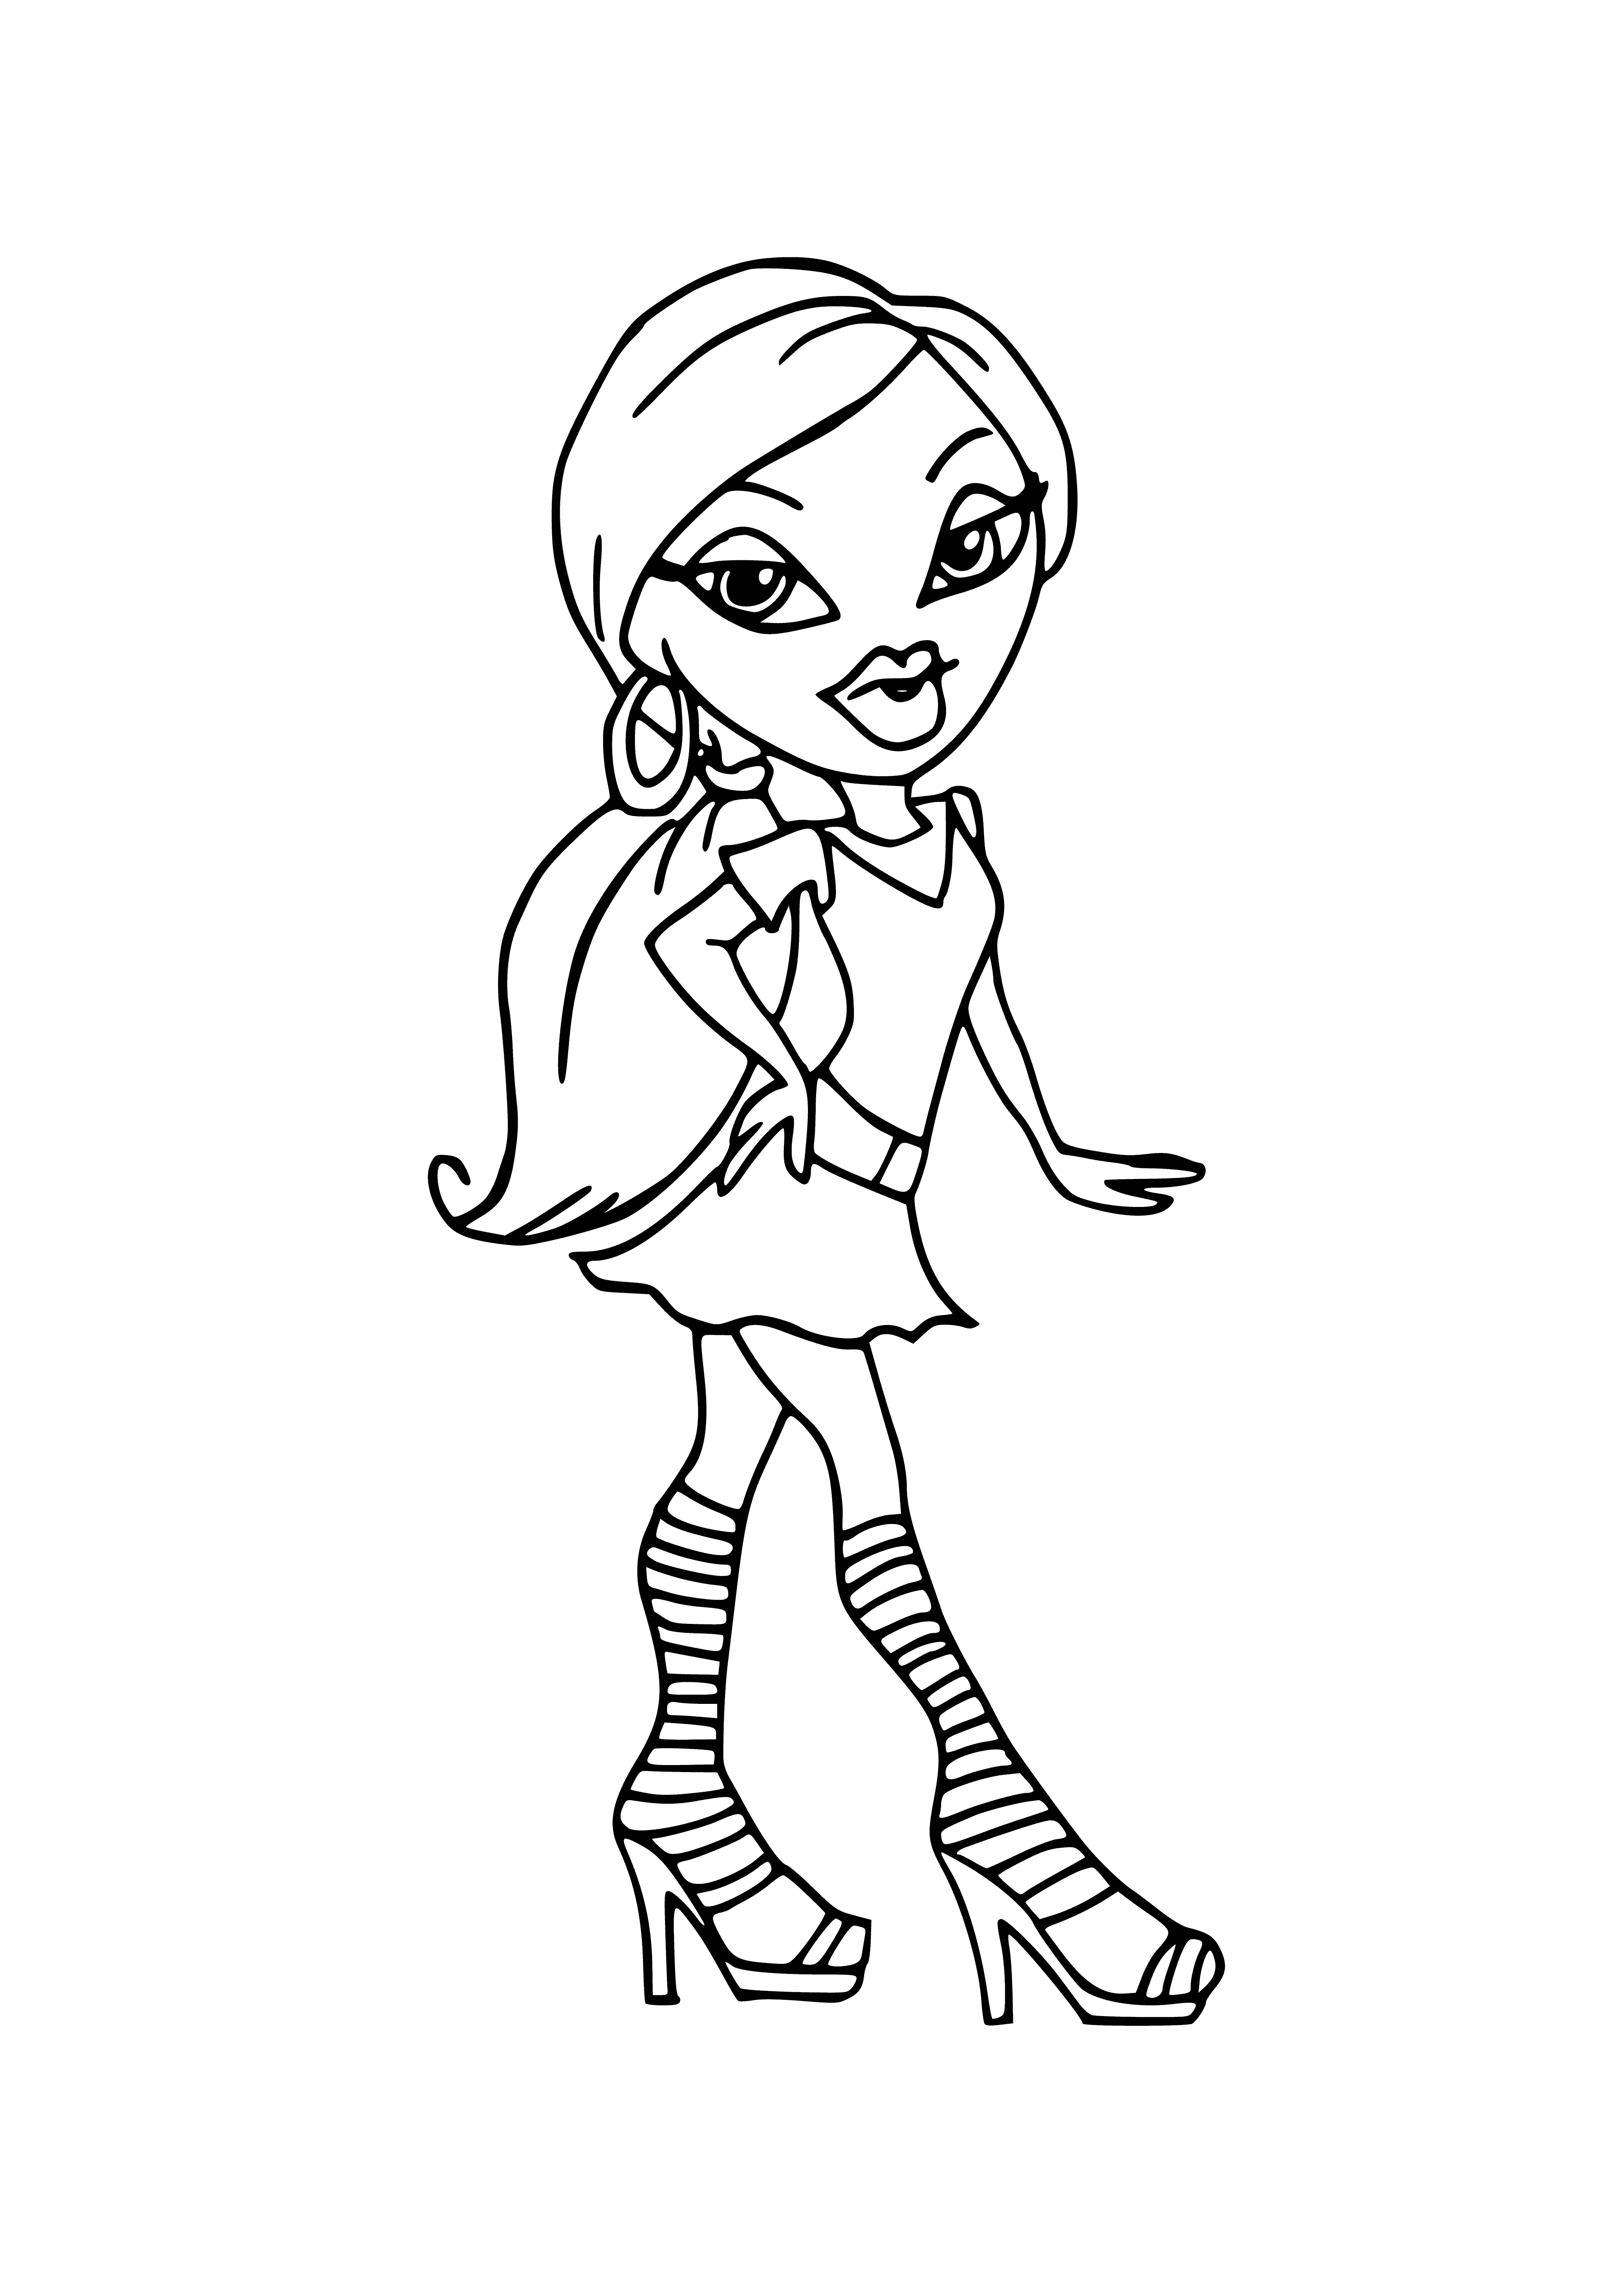 coloring page: Four fashionable teen dolls with big heads, almond-shaped eyes, and different hair thrive in the world of style with trendy clothes and high heels.